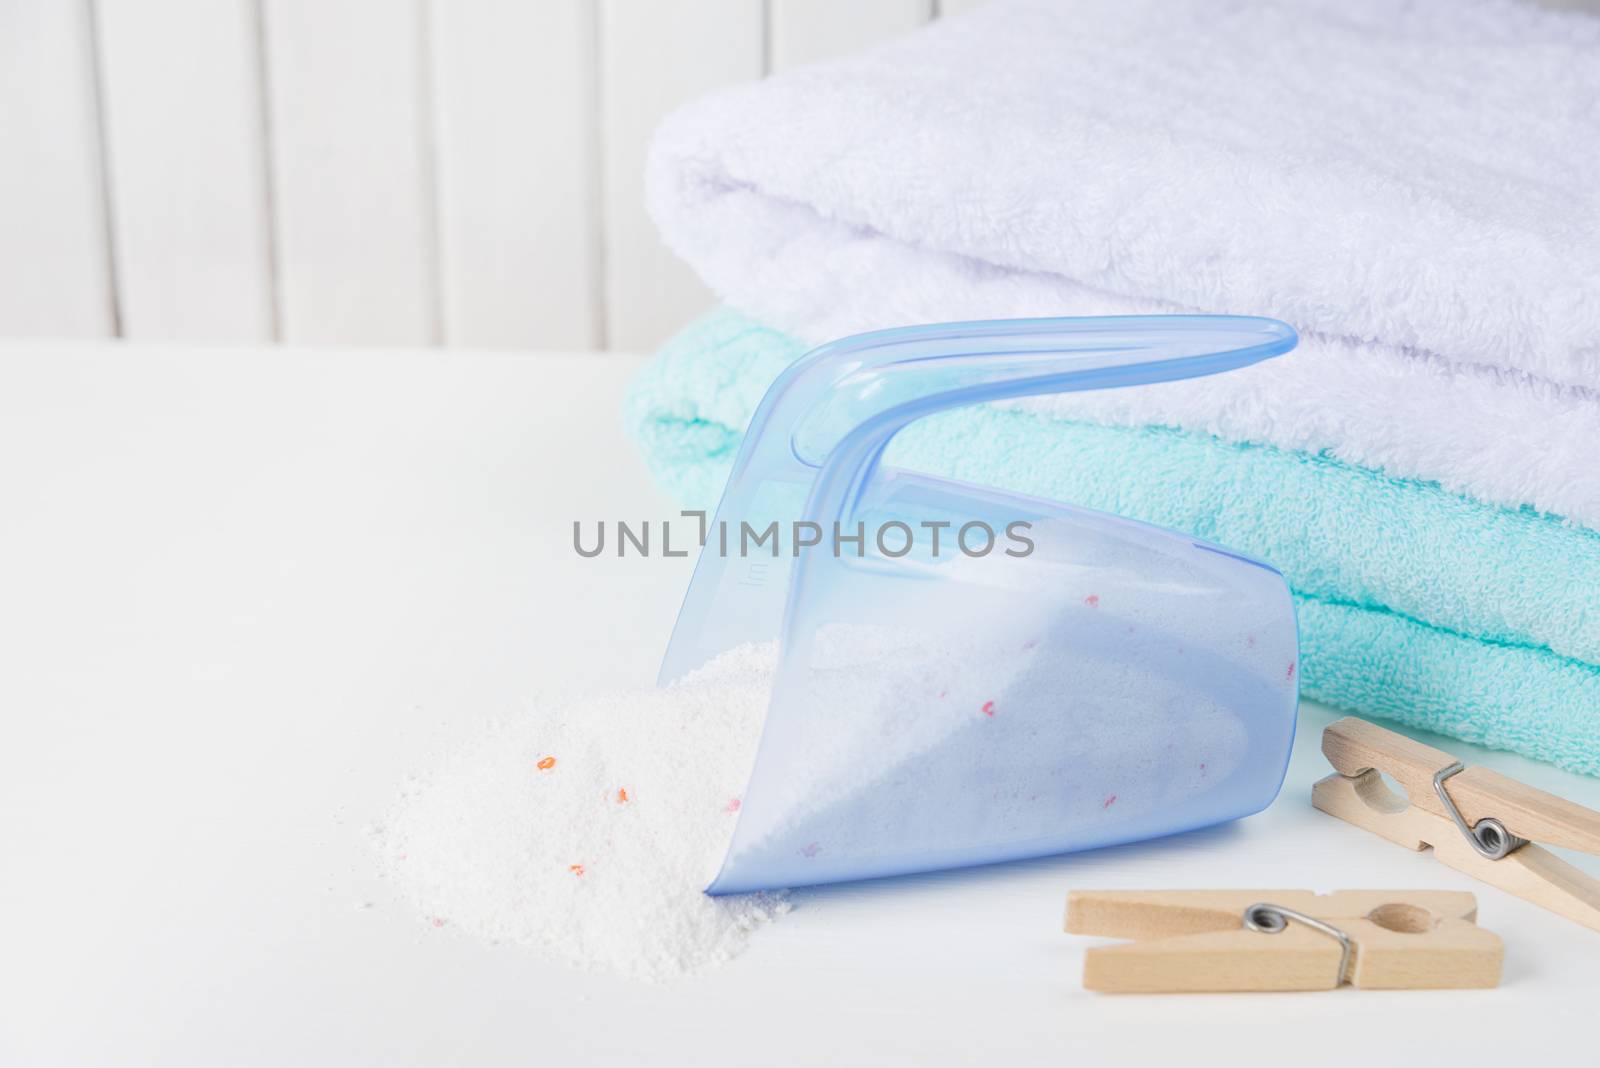 Stack of white and blue fluffy bath towels, washing powder spilled from a measuring cup and wooden clothespins on the background of white boards